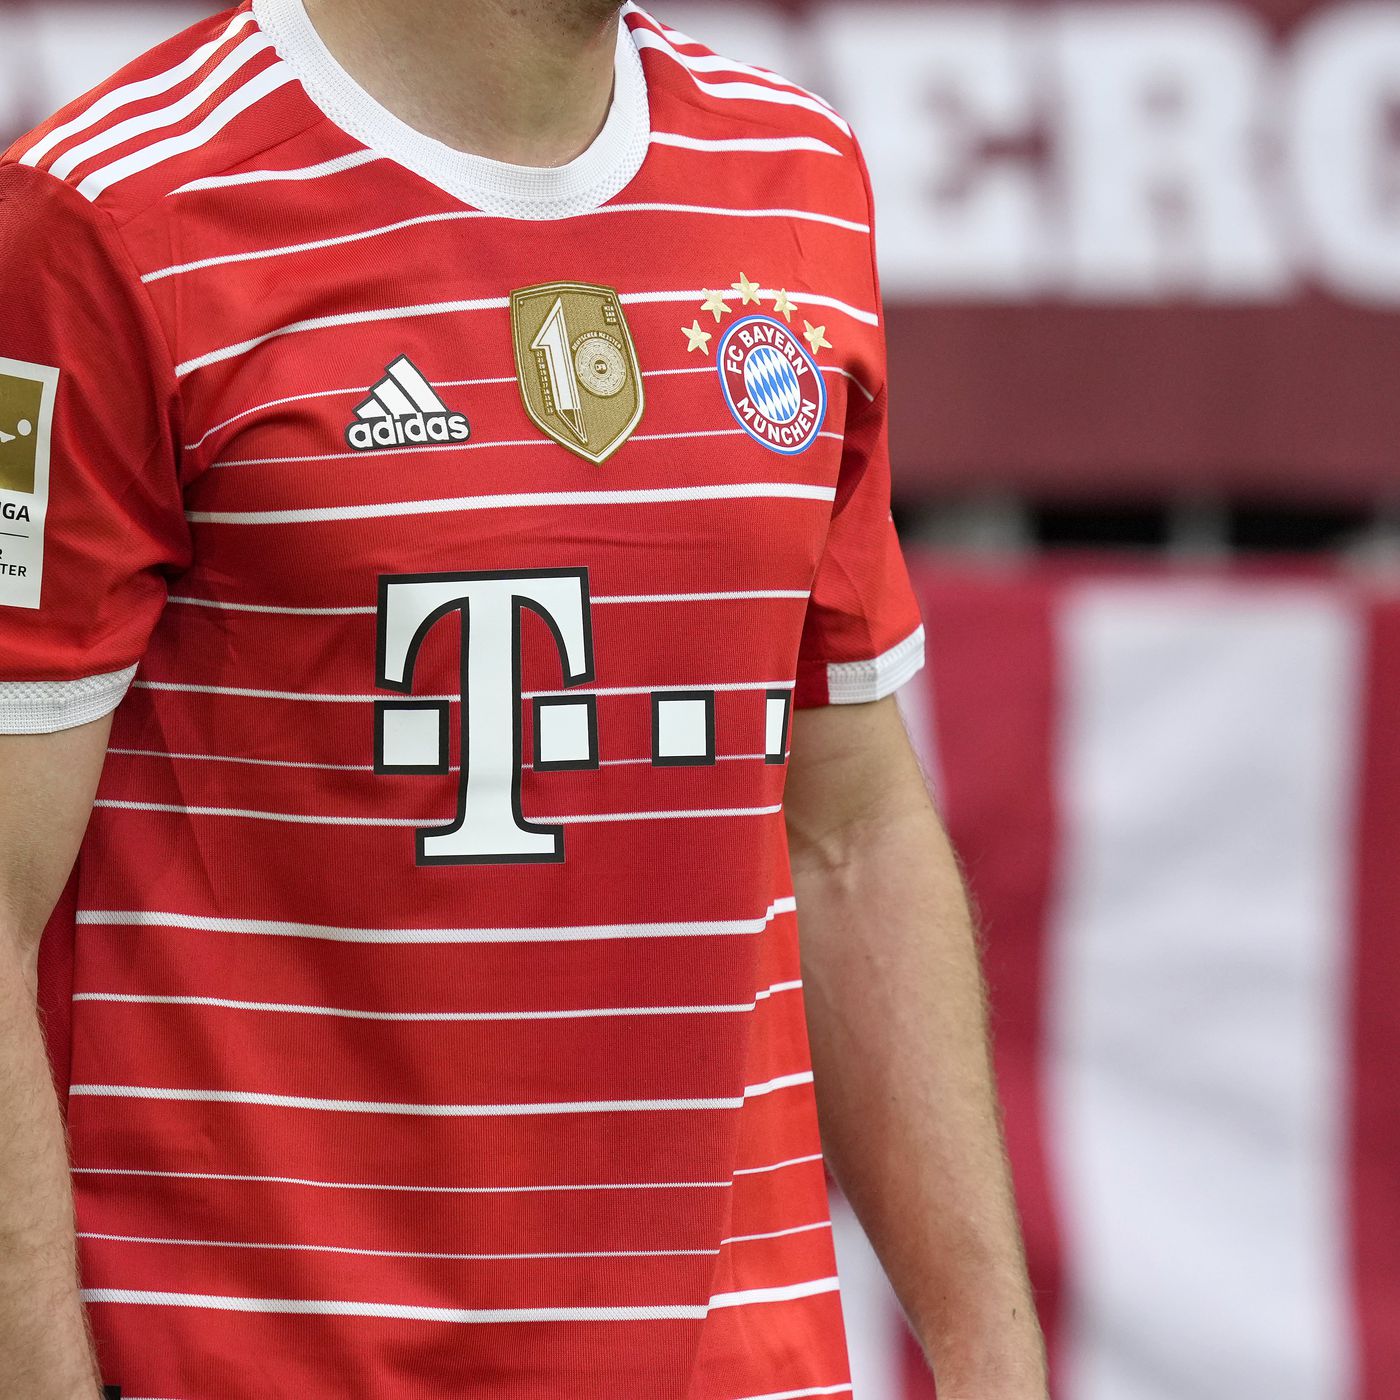 Bavarian Fashion Works: Bayern Munich releases exclusive kit to